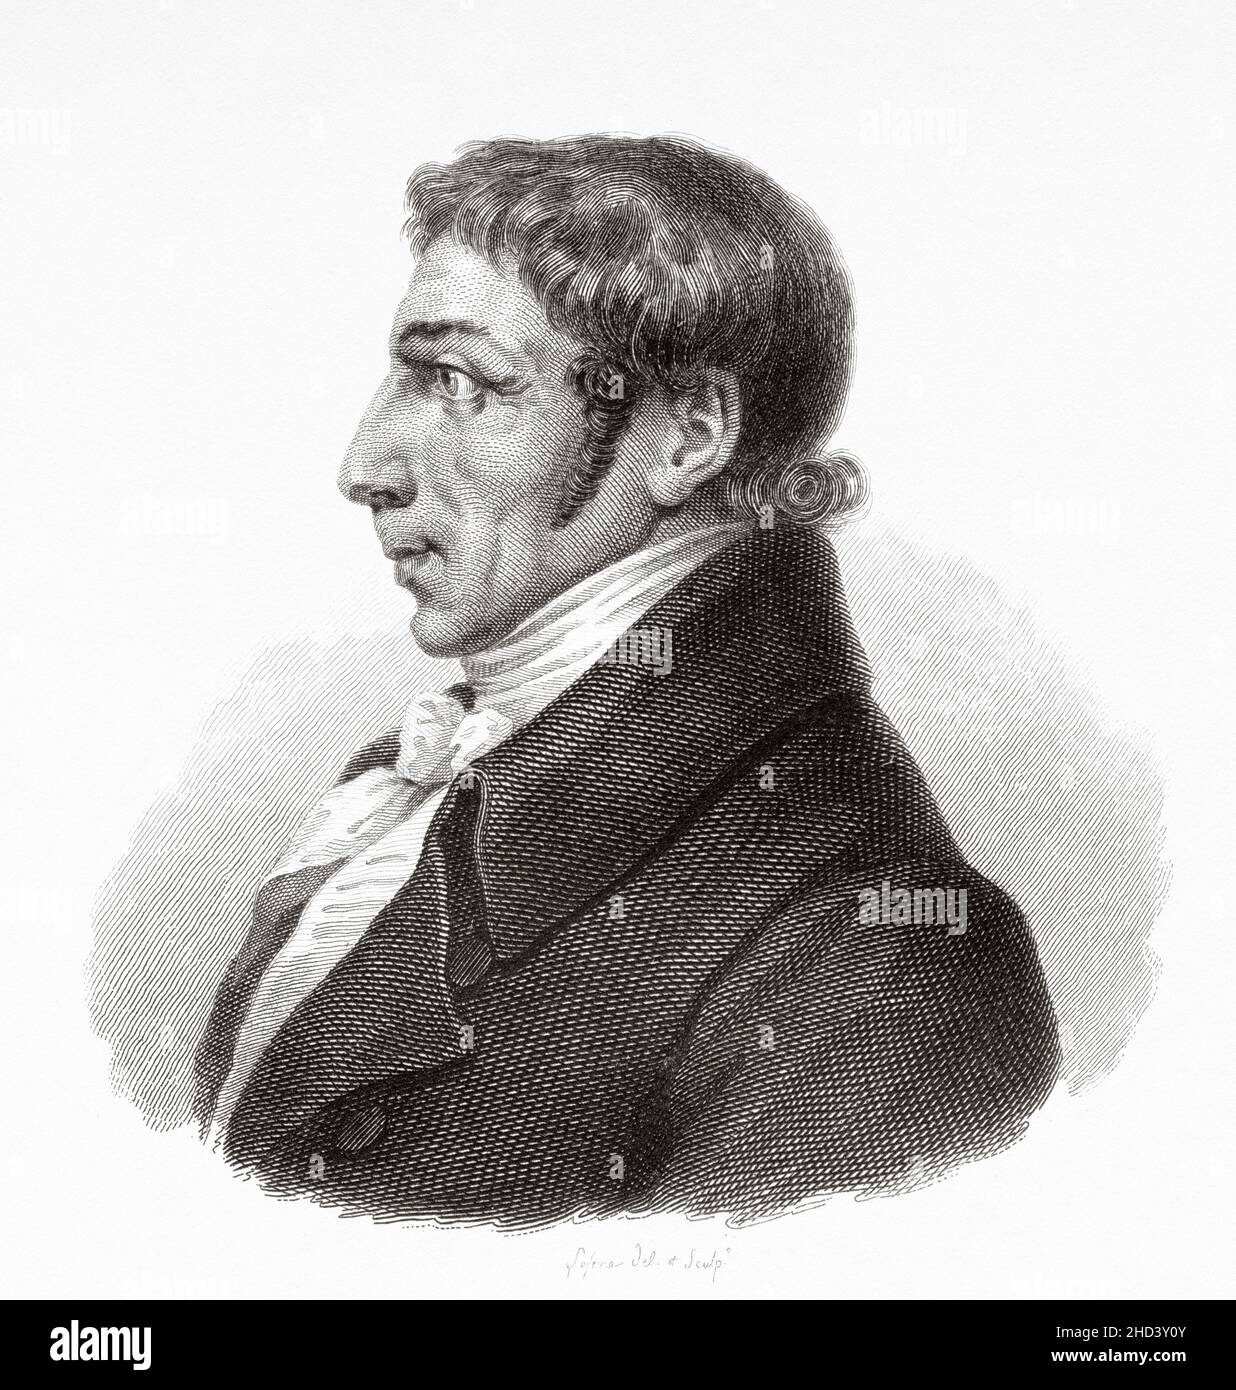 Albrecht Daniel Thaer (1752-1828) was a renowned German agronomist and an avid supporter of the humus theory for plant nutrition, polymath and founder of Agricultural Science. Europe. Old 19th century engraved illustration from Portraits et histoire des hommes utile by Societe Montyon et Franklin 1837 Stock Photo